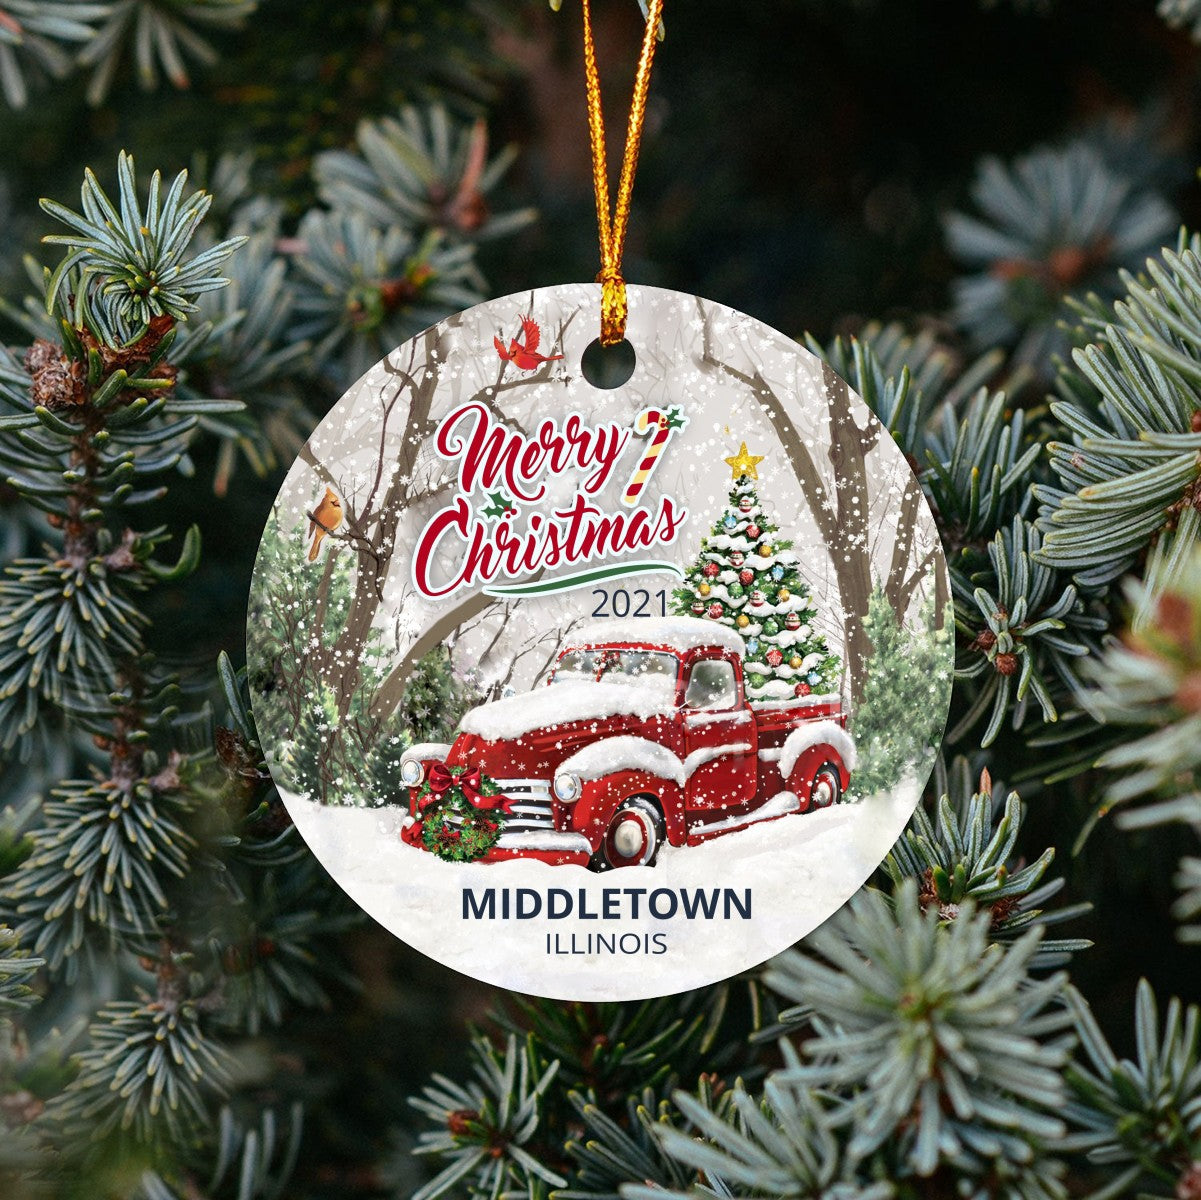 Christmas Tree Ornaments Middletown - Ornament With Name City, State Middletown Illinois IL Ornament - Red Truck Xmas Ornaments 3'' Plastic Gift For Family, Friend And Housewarming